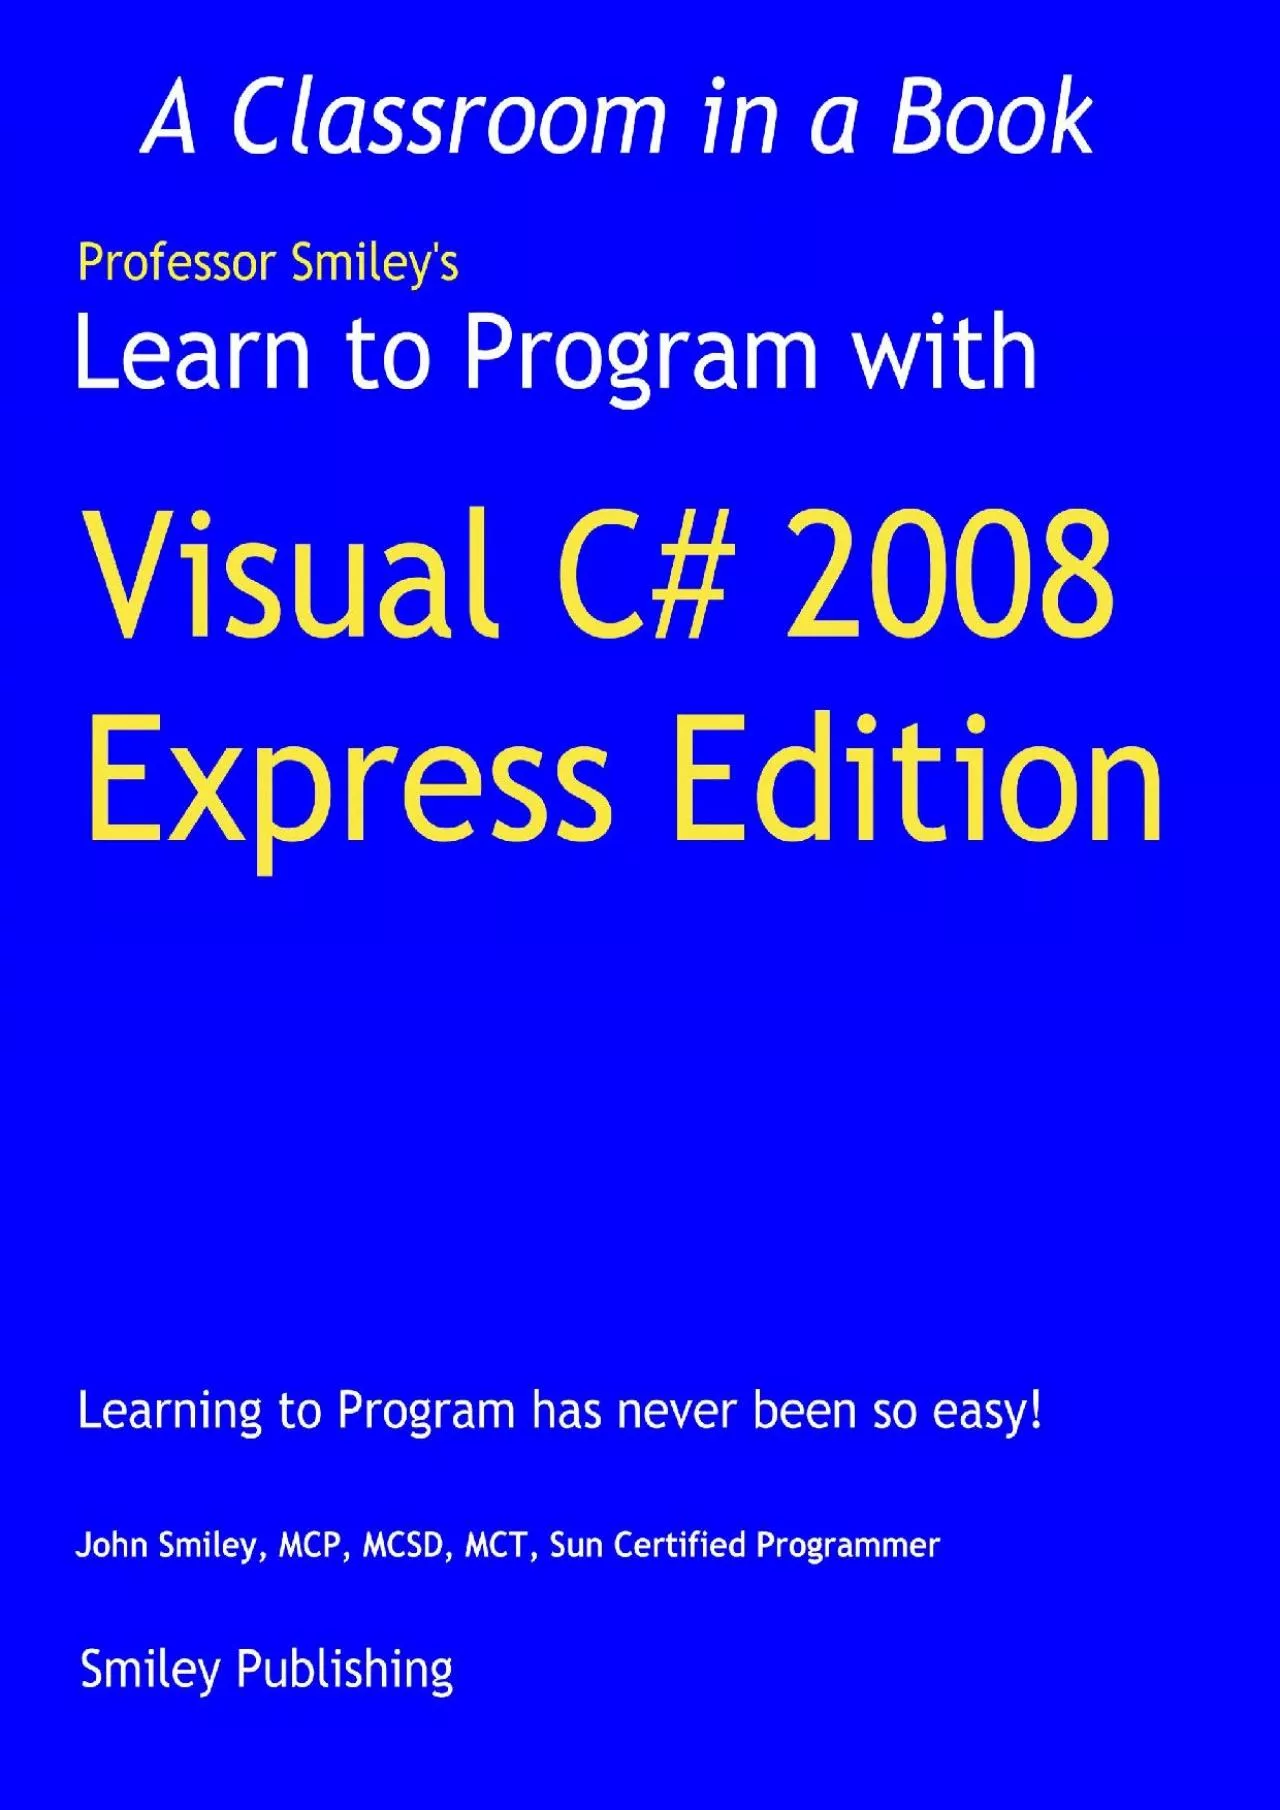 [BEST]-Learn to Program with Visual C 2008 Express (Professor Smiley teaches Computer